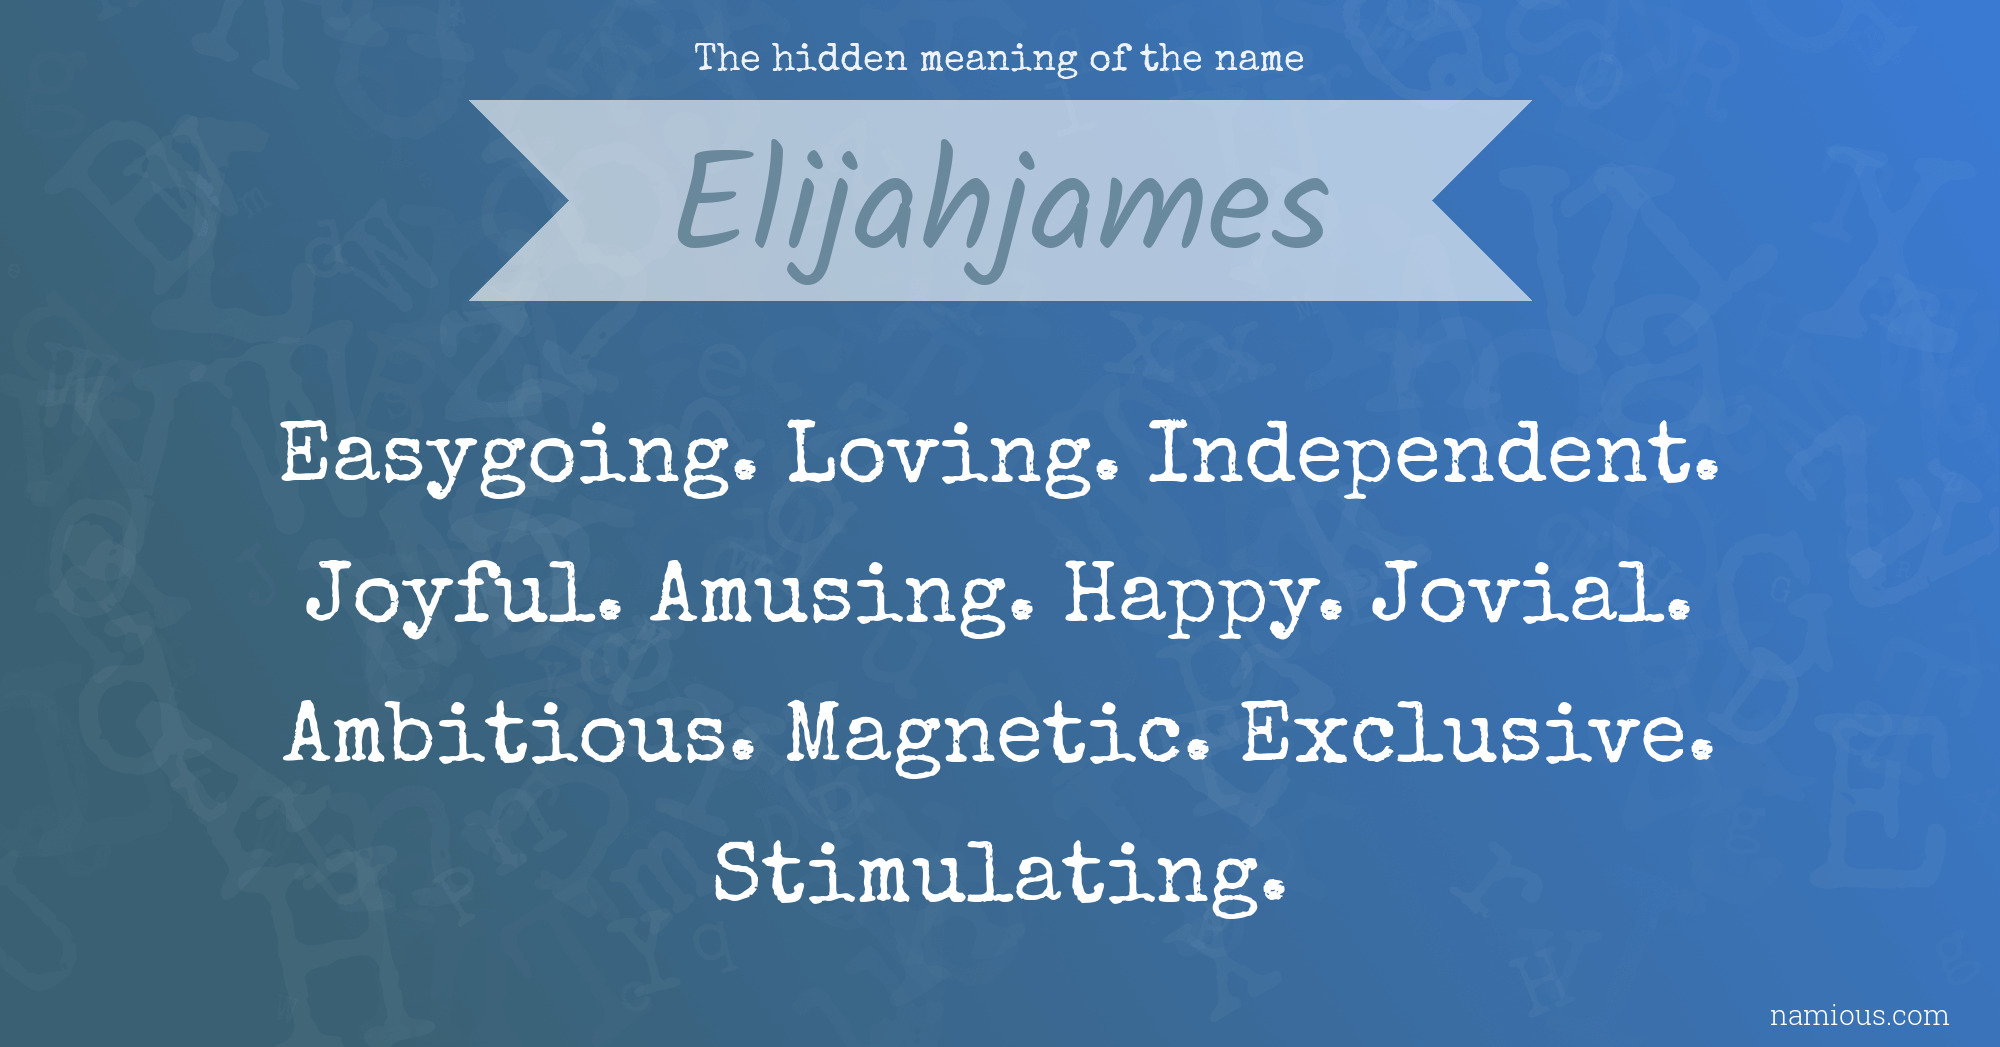 The hidden meaning of the name Elijahjames